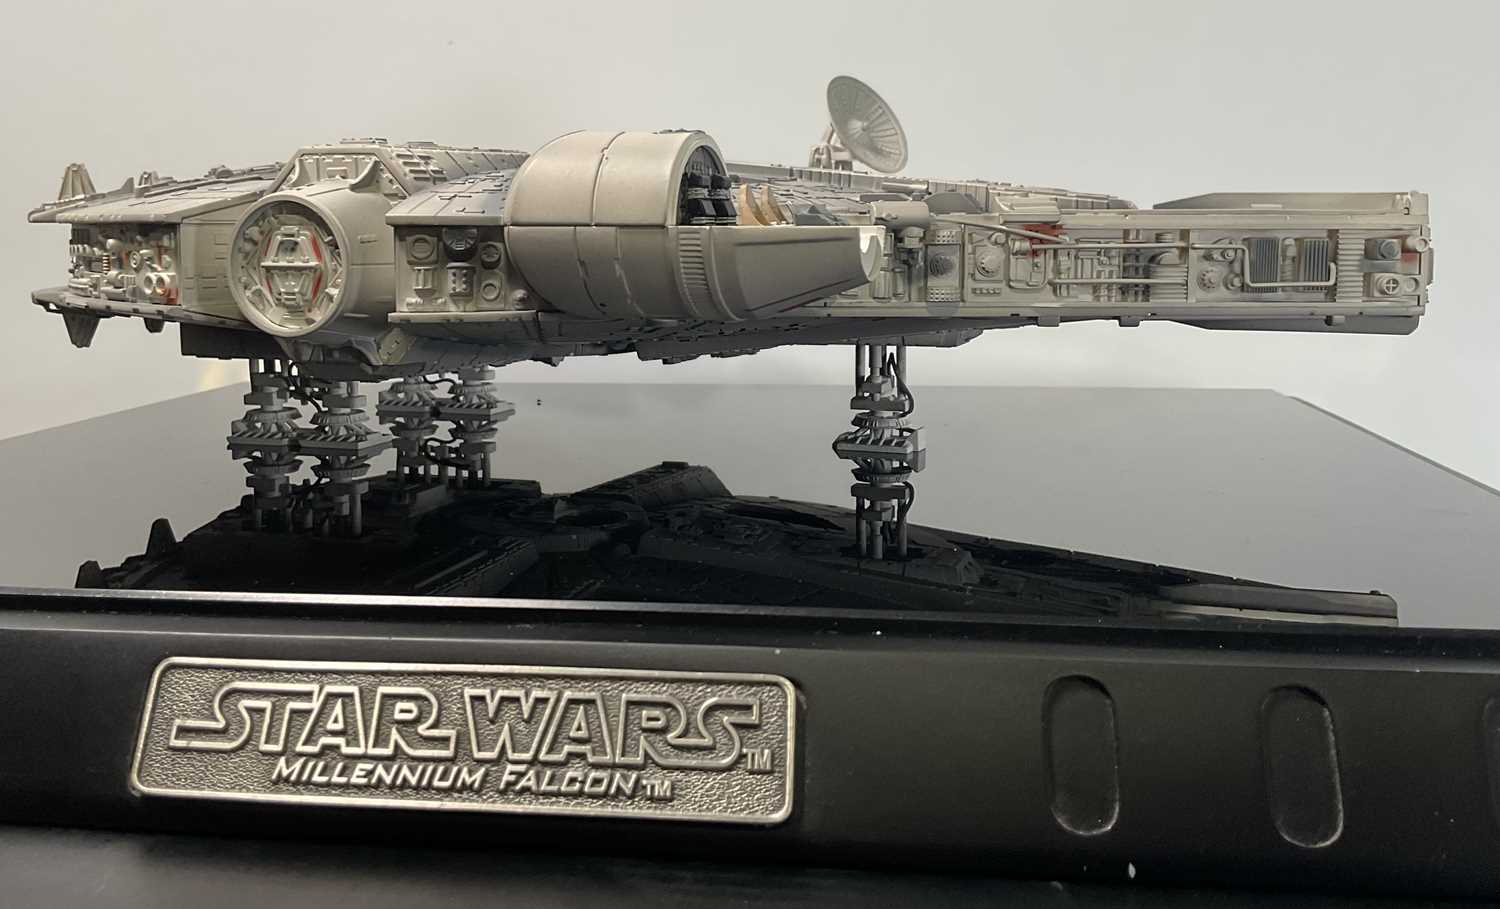 STAR WARS - A Code 3 Die Cast, hand-painted replica of the Millennium Falcon scale, limited - Image 8 of 12